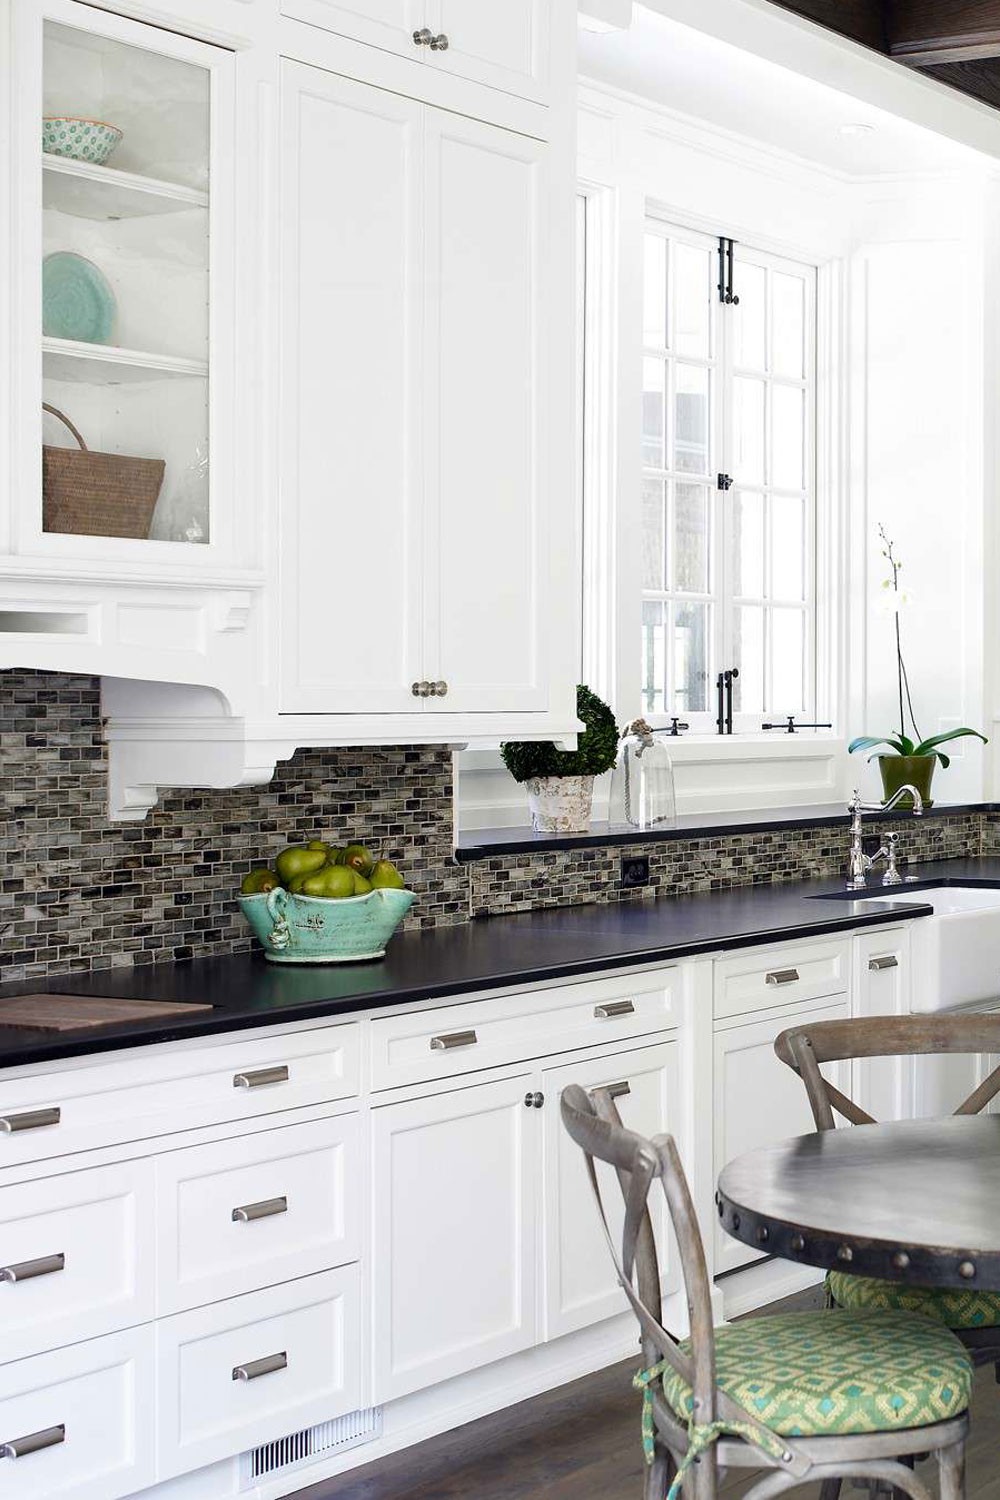 backsplash ideas with white cabinets and black countertops
 50+ Black Countertop Backsplash Ideas (Tile Designs, Tips ..